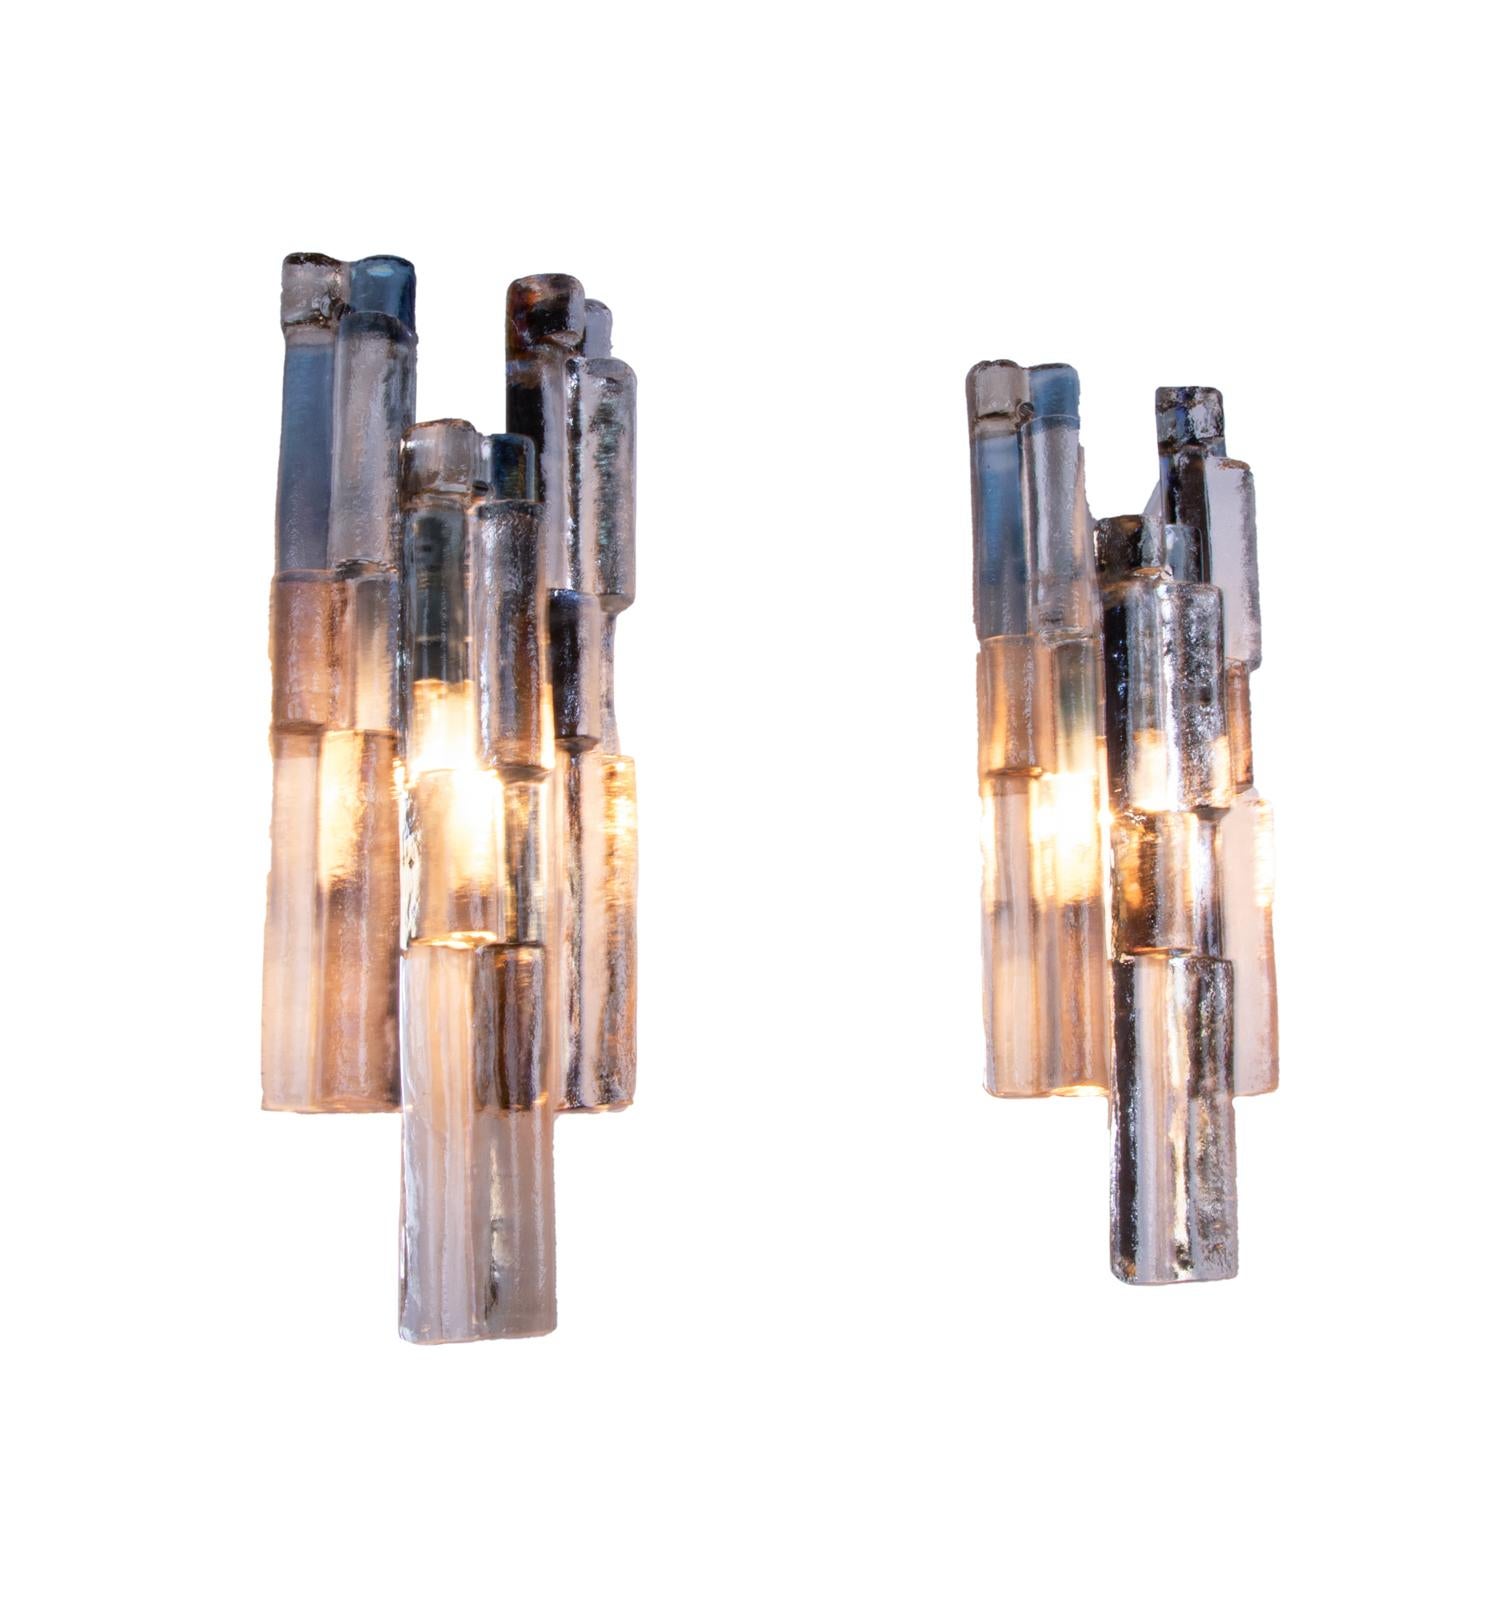 Elegant pair of multicolored Murano glass wall lights designed by J.T. Kalmar made of textured clear glass elements with blue, smoke, amber and clear tinting suspended on a white lacquered nickel backplate. 

Beautiful play of light and colors when